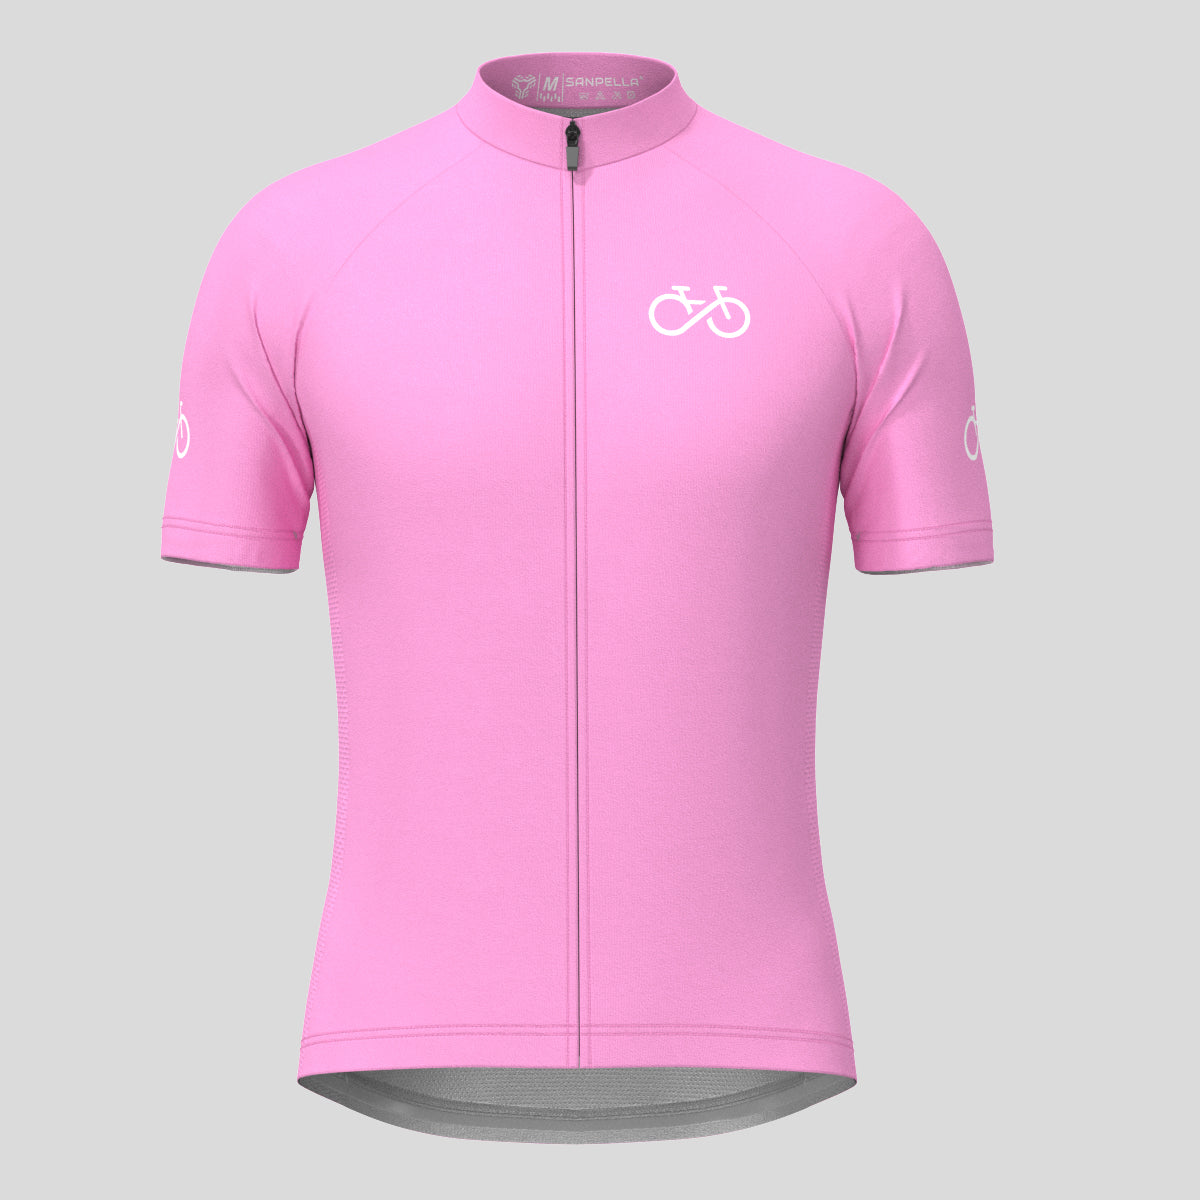 Ride Forever Men's Cycling Jersey -Neo Pink